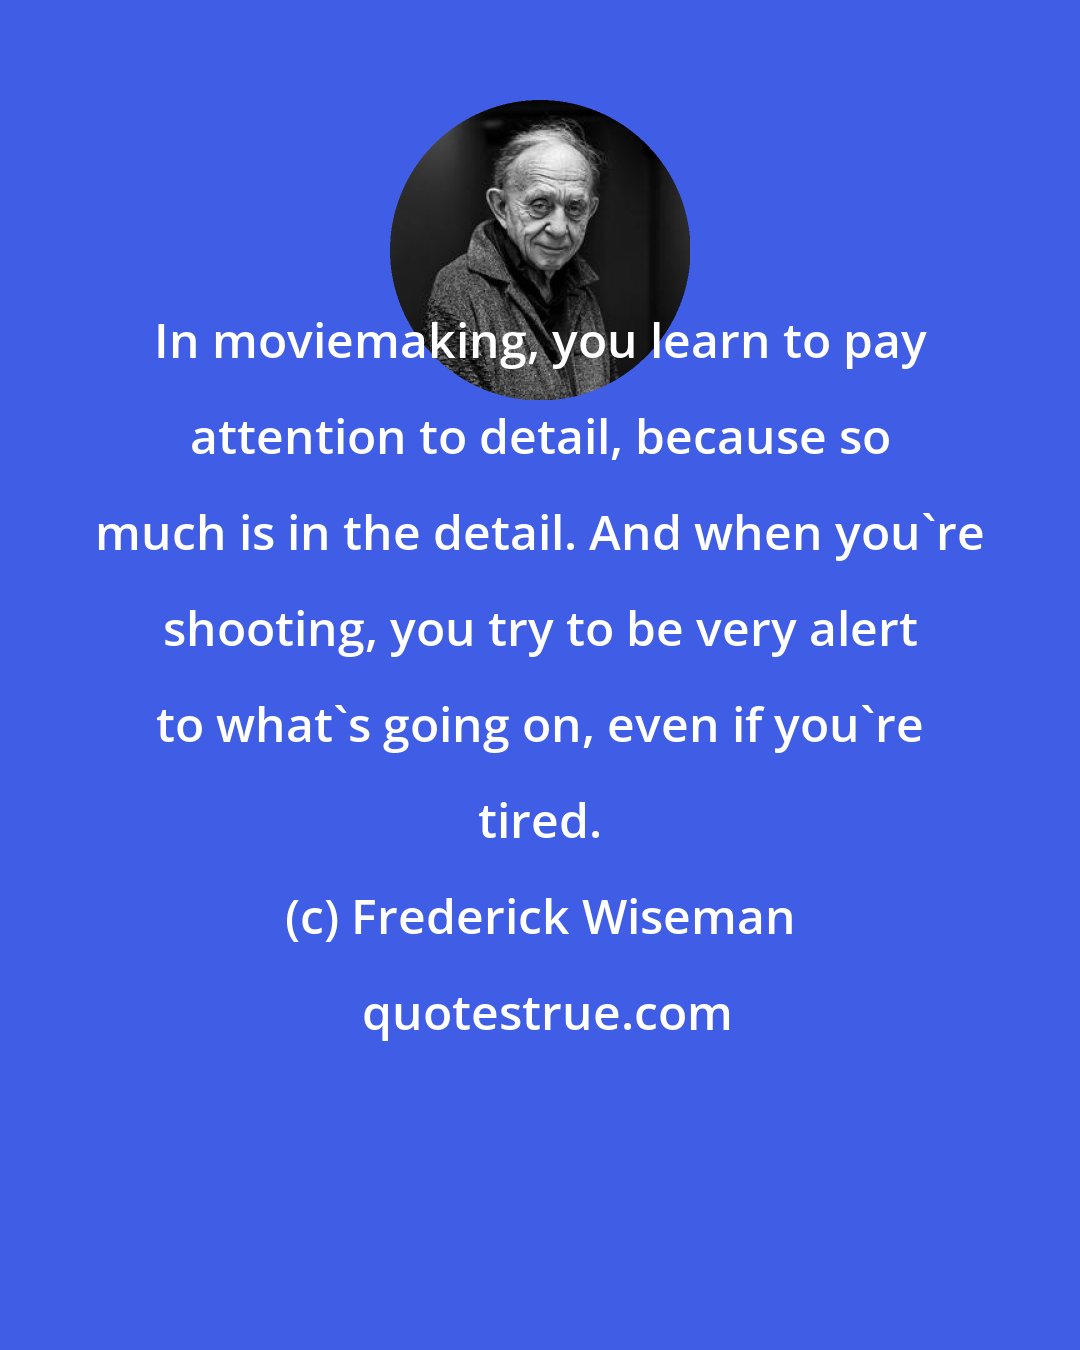 Frederick Wiseman: In moviemaking, you learn to pay attention to detail, because so much is in the detail. And when you're shooting, you try to be very alert to what's going on, even if you're tired.